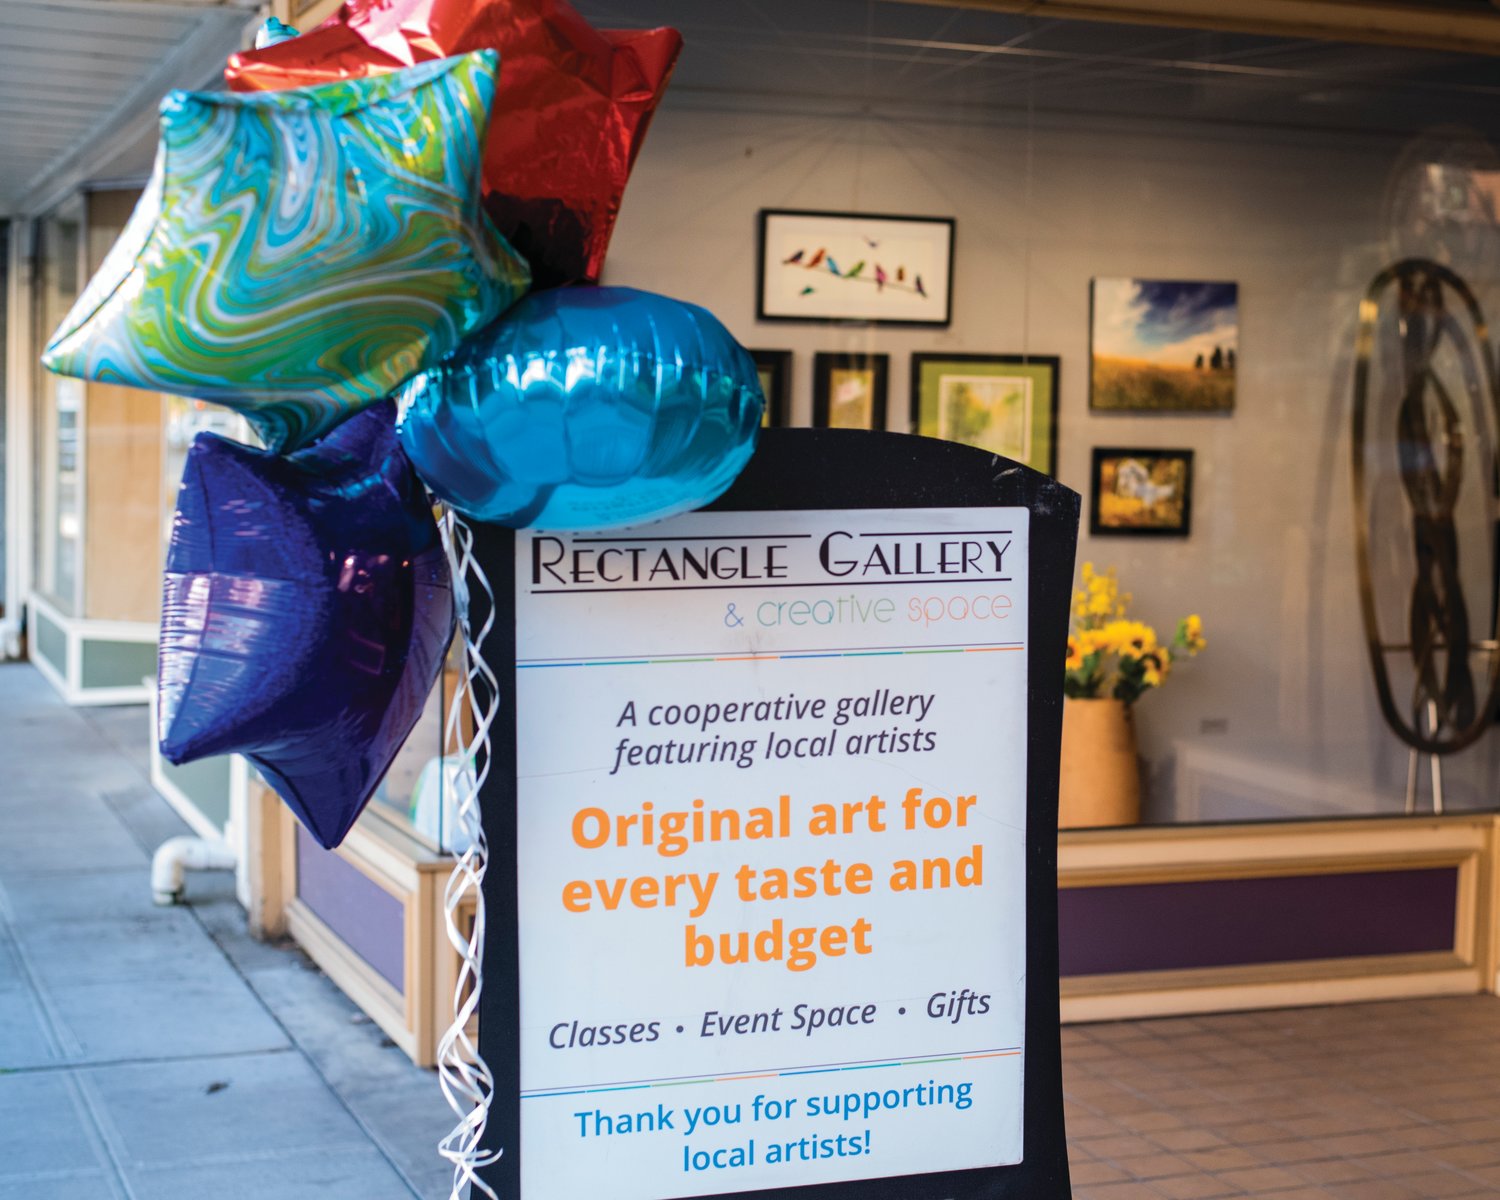 The Rectangle Gallery & Creative Space is located at 209 North Tower Avenue in Centralia.